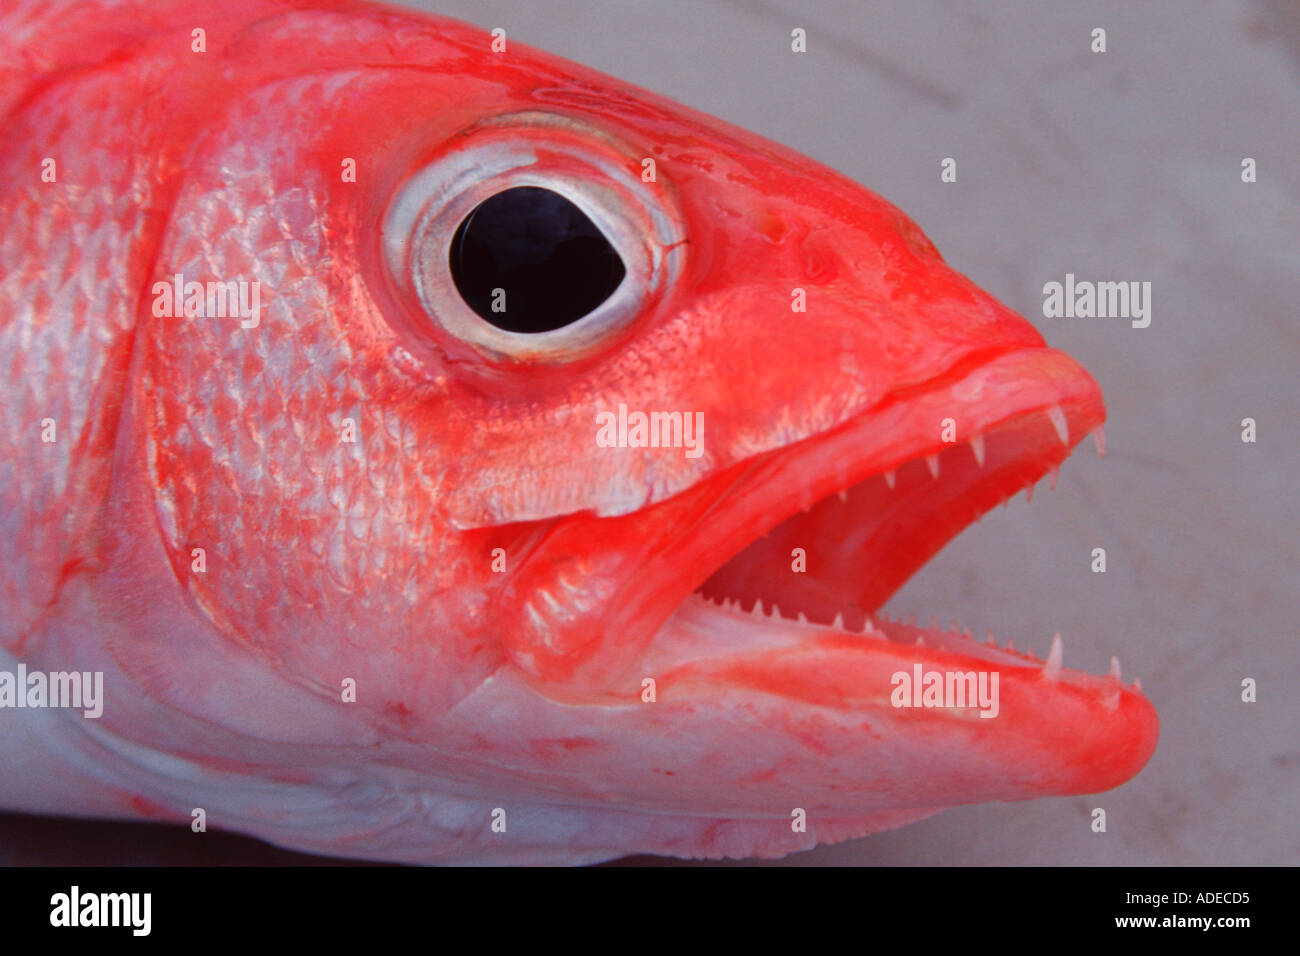 Red snapper Onaga Etelis coruscans Oahu Hawaii North Pacific Stock Photo